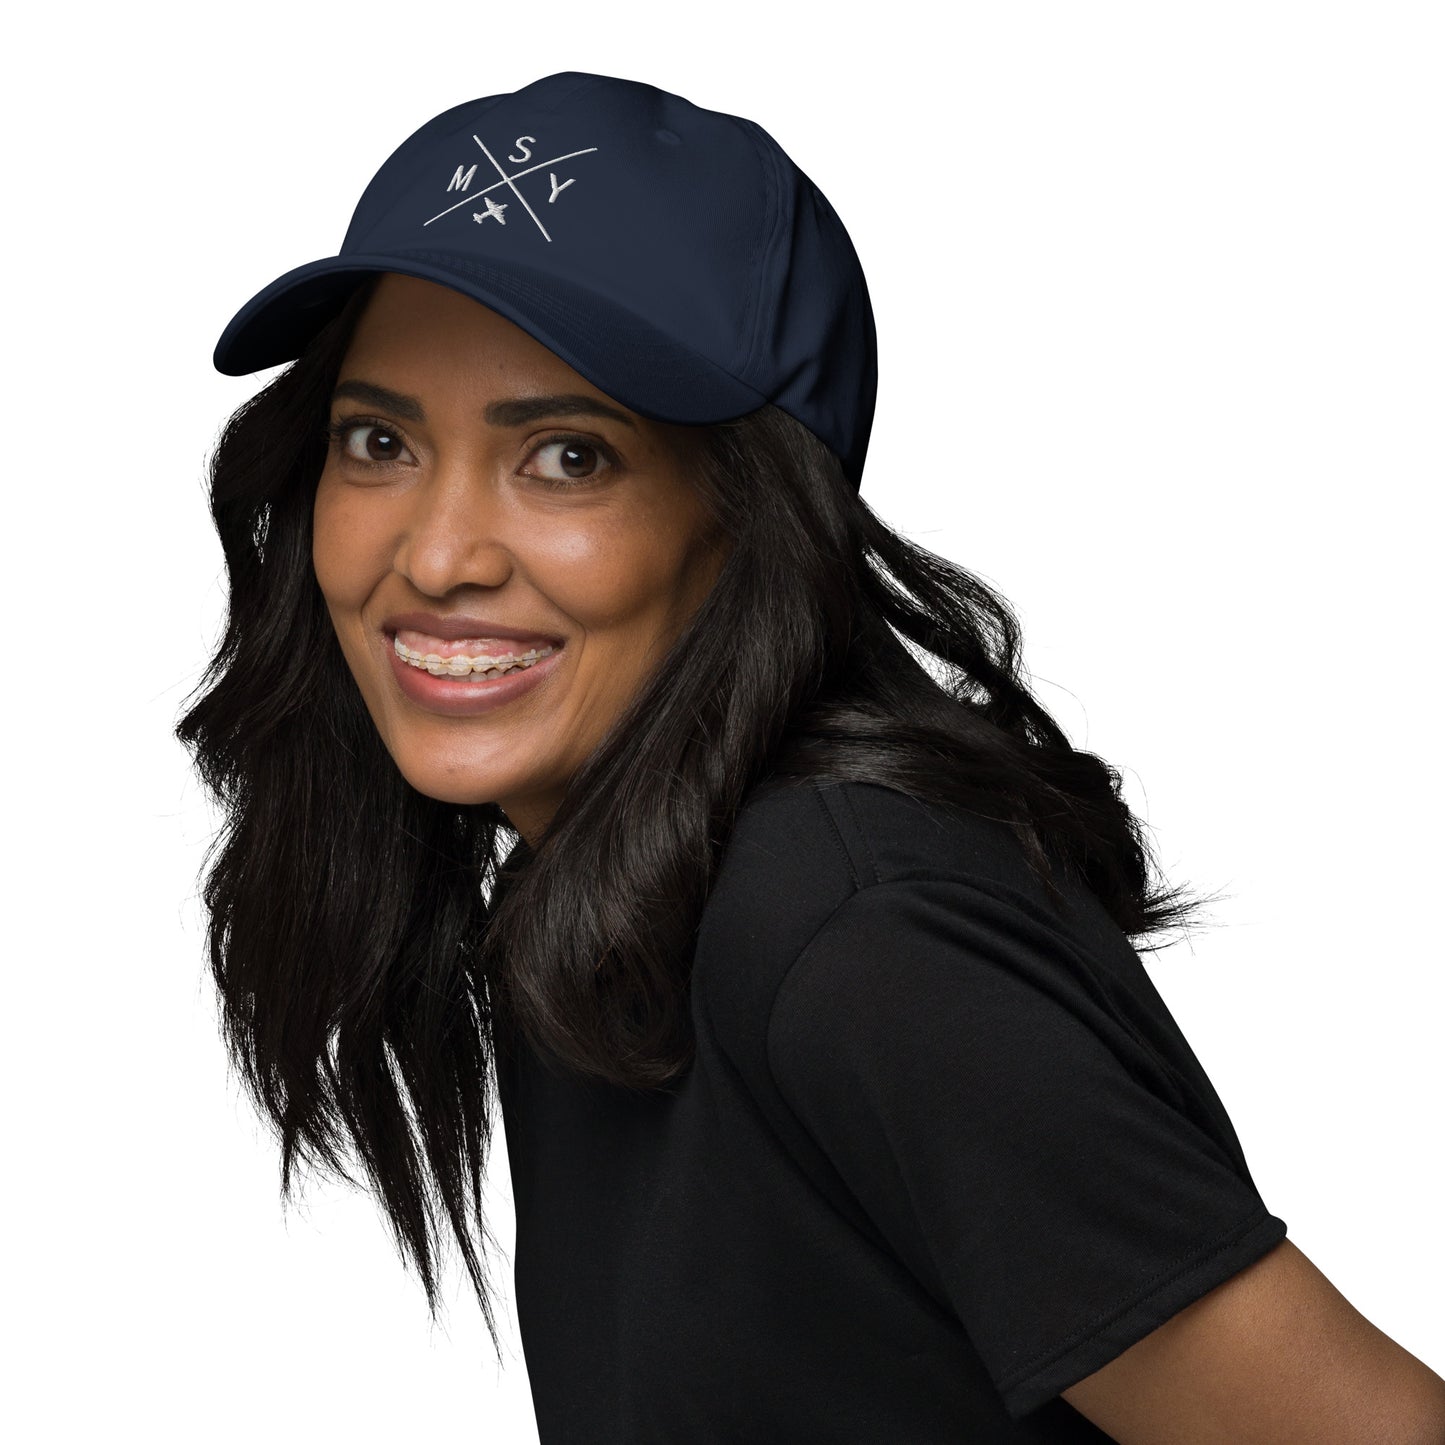 Crossed-X Dad Hat - White • MSY New Orleans • YHM Designs - Image 04